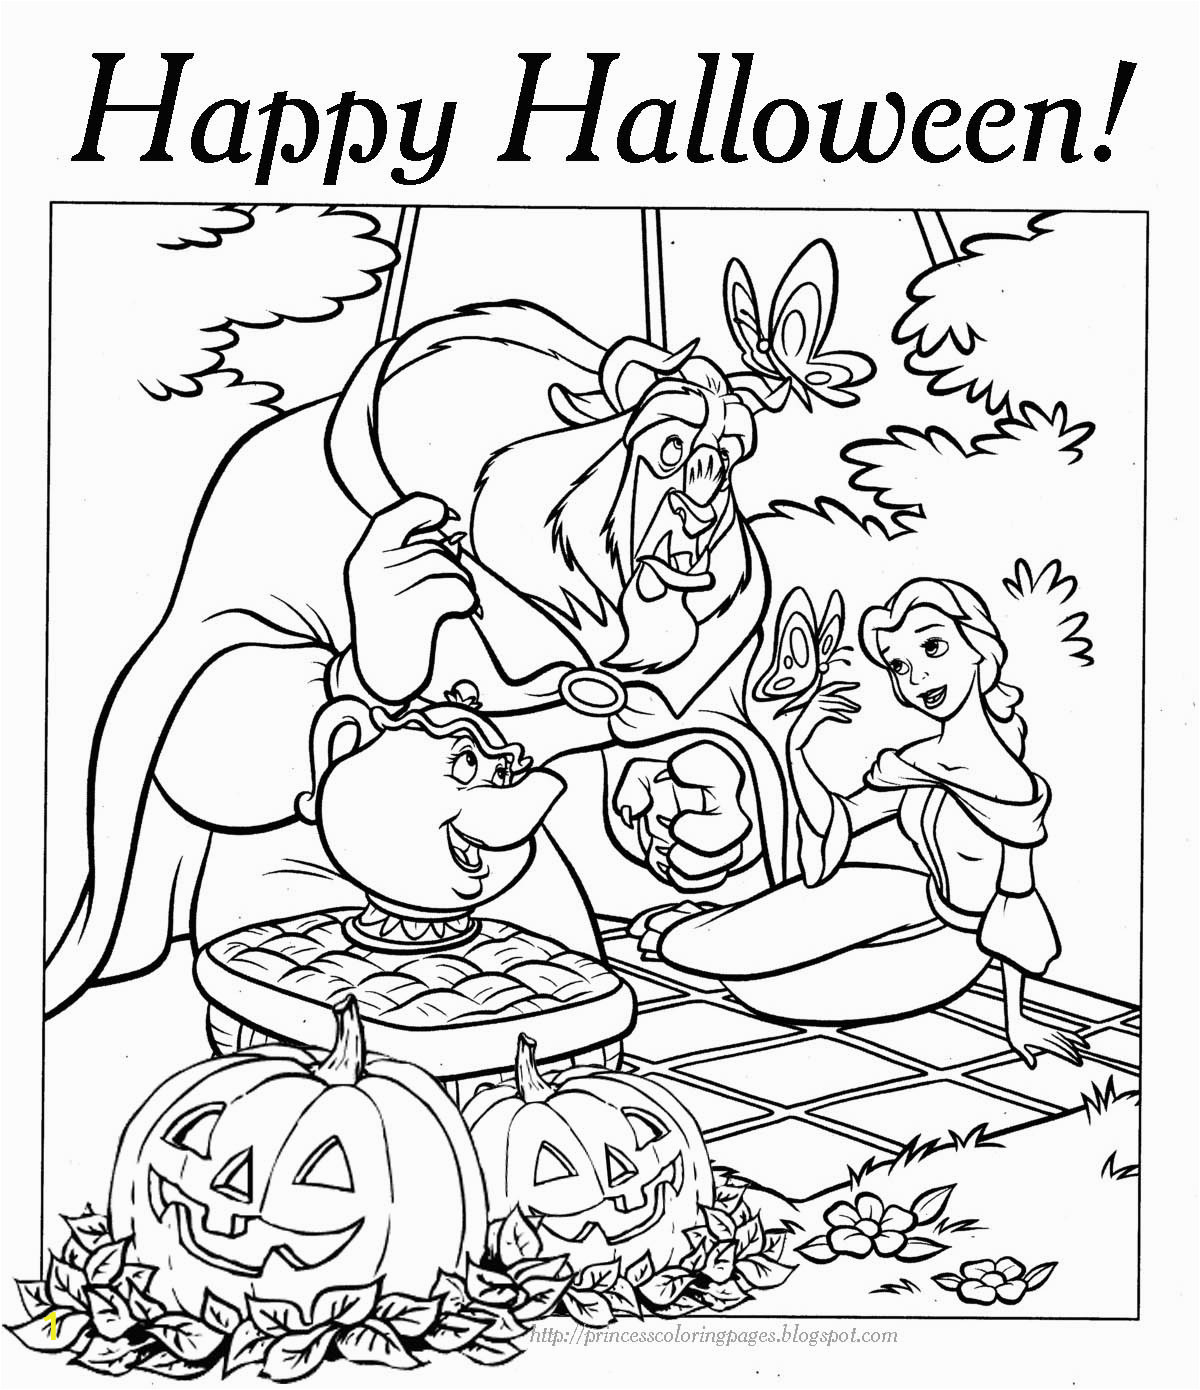 halloween coloring page princess belle 5901